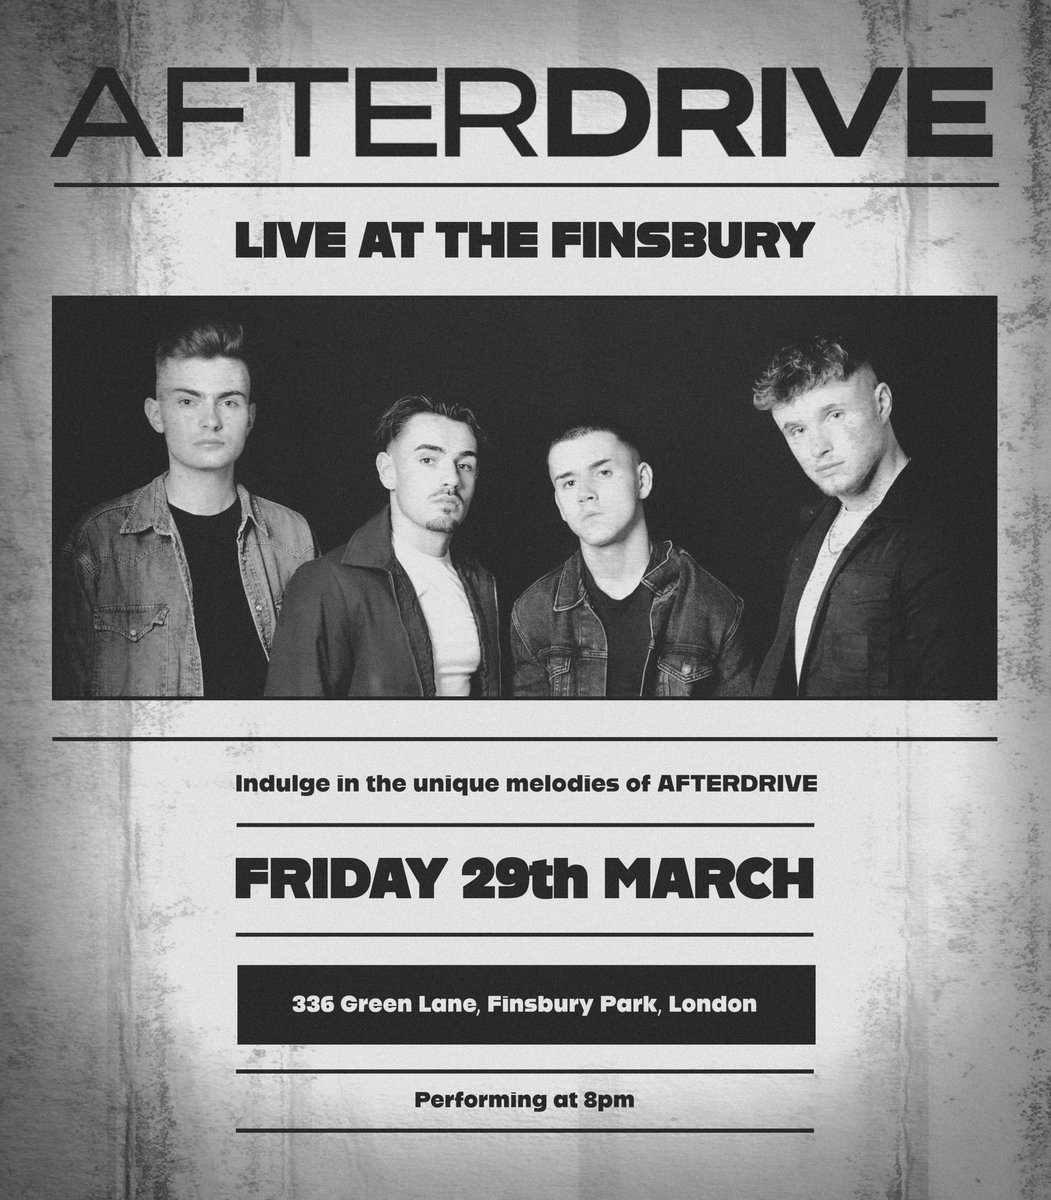 AFTERDRIVE are back in London this Friday! In Finsbury Park at @thefinsbury 🎶 Come on down at 8pm to hear the full AFTERDRIVE live experience 🎸 On behalf @londonmusicshowcase 👈